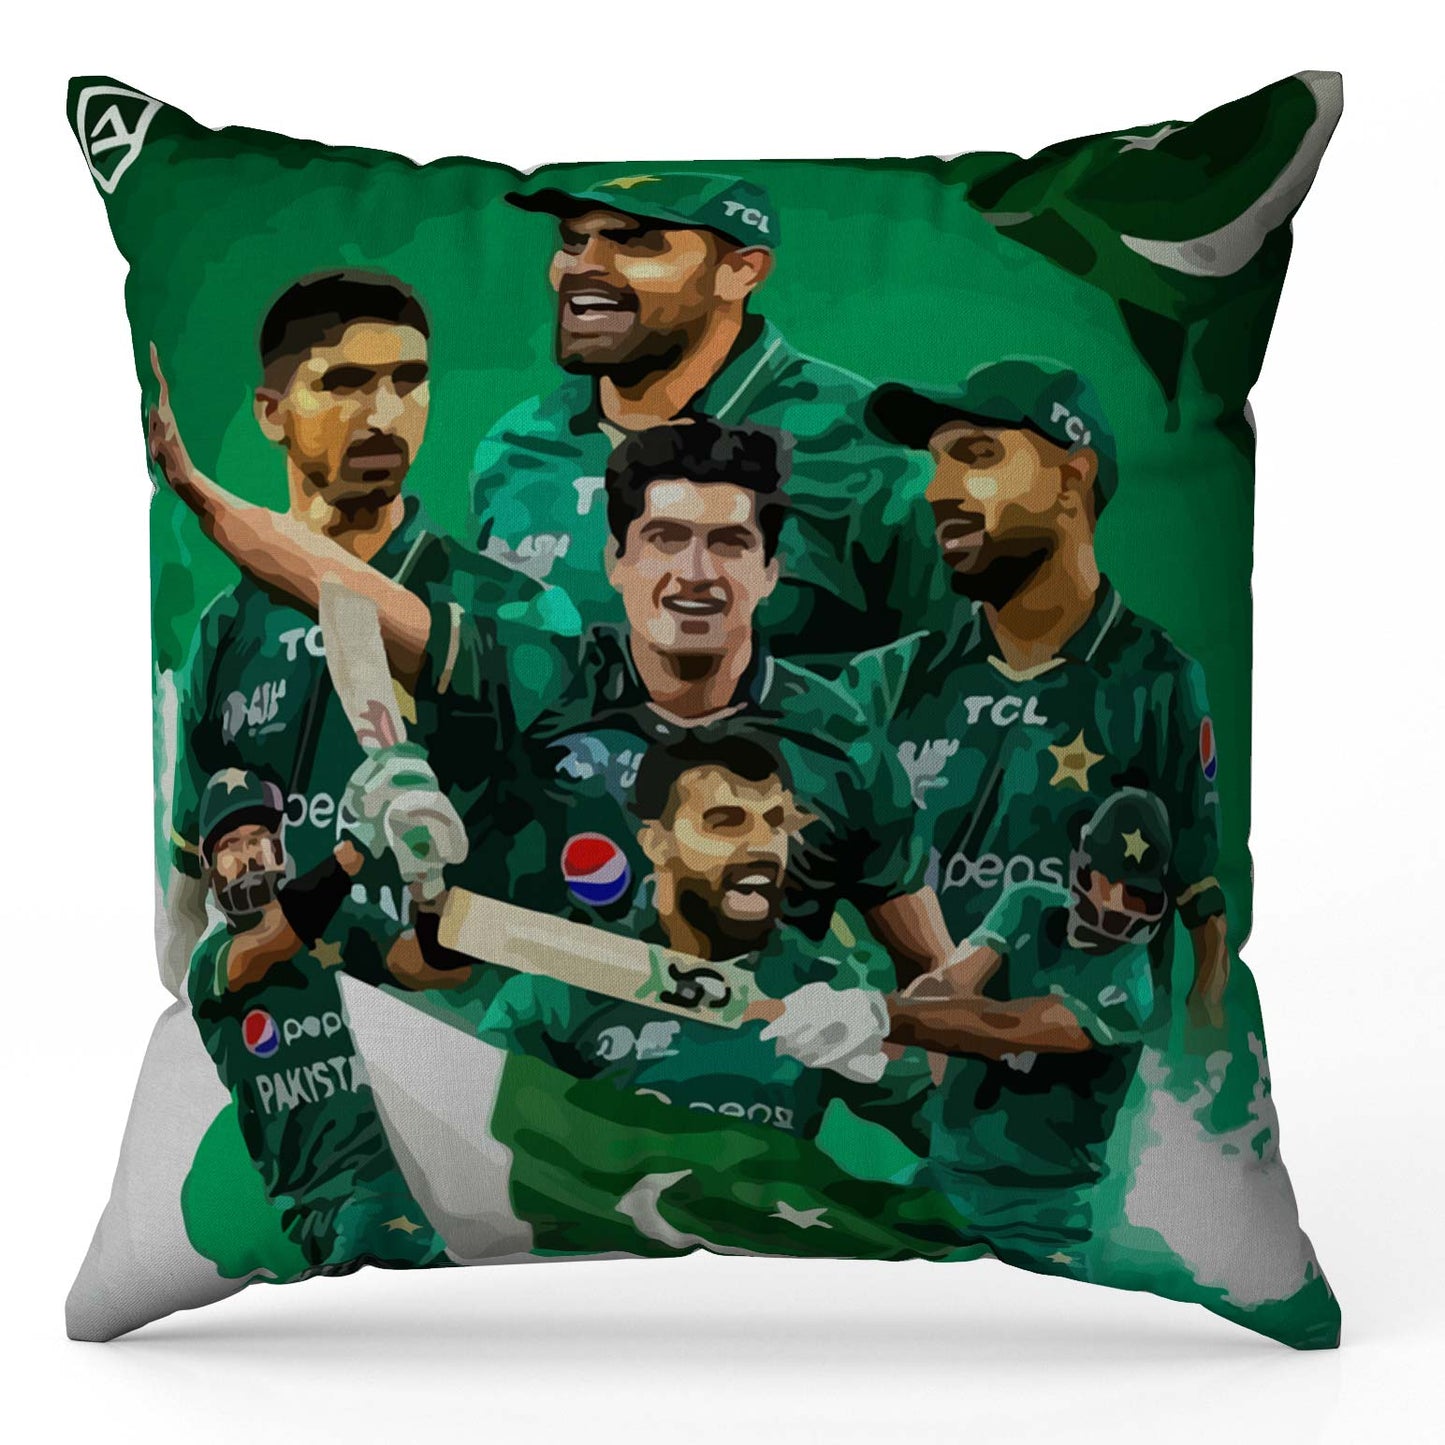 Boys in Green Cushion Cover Trendy Home